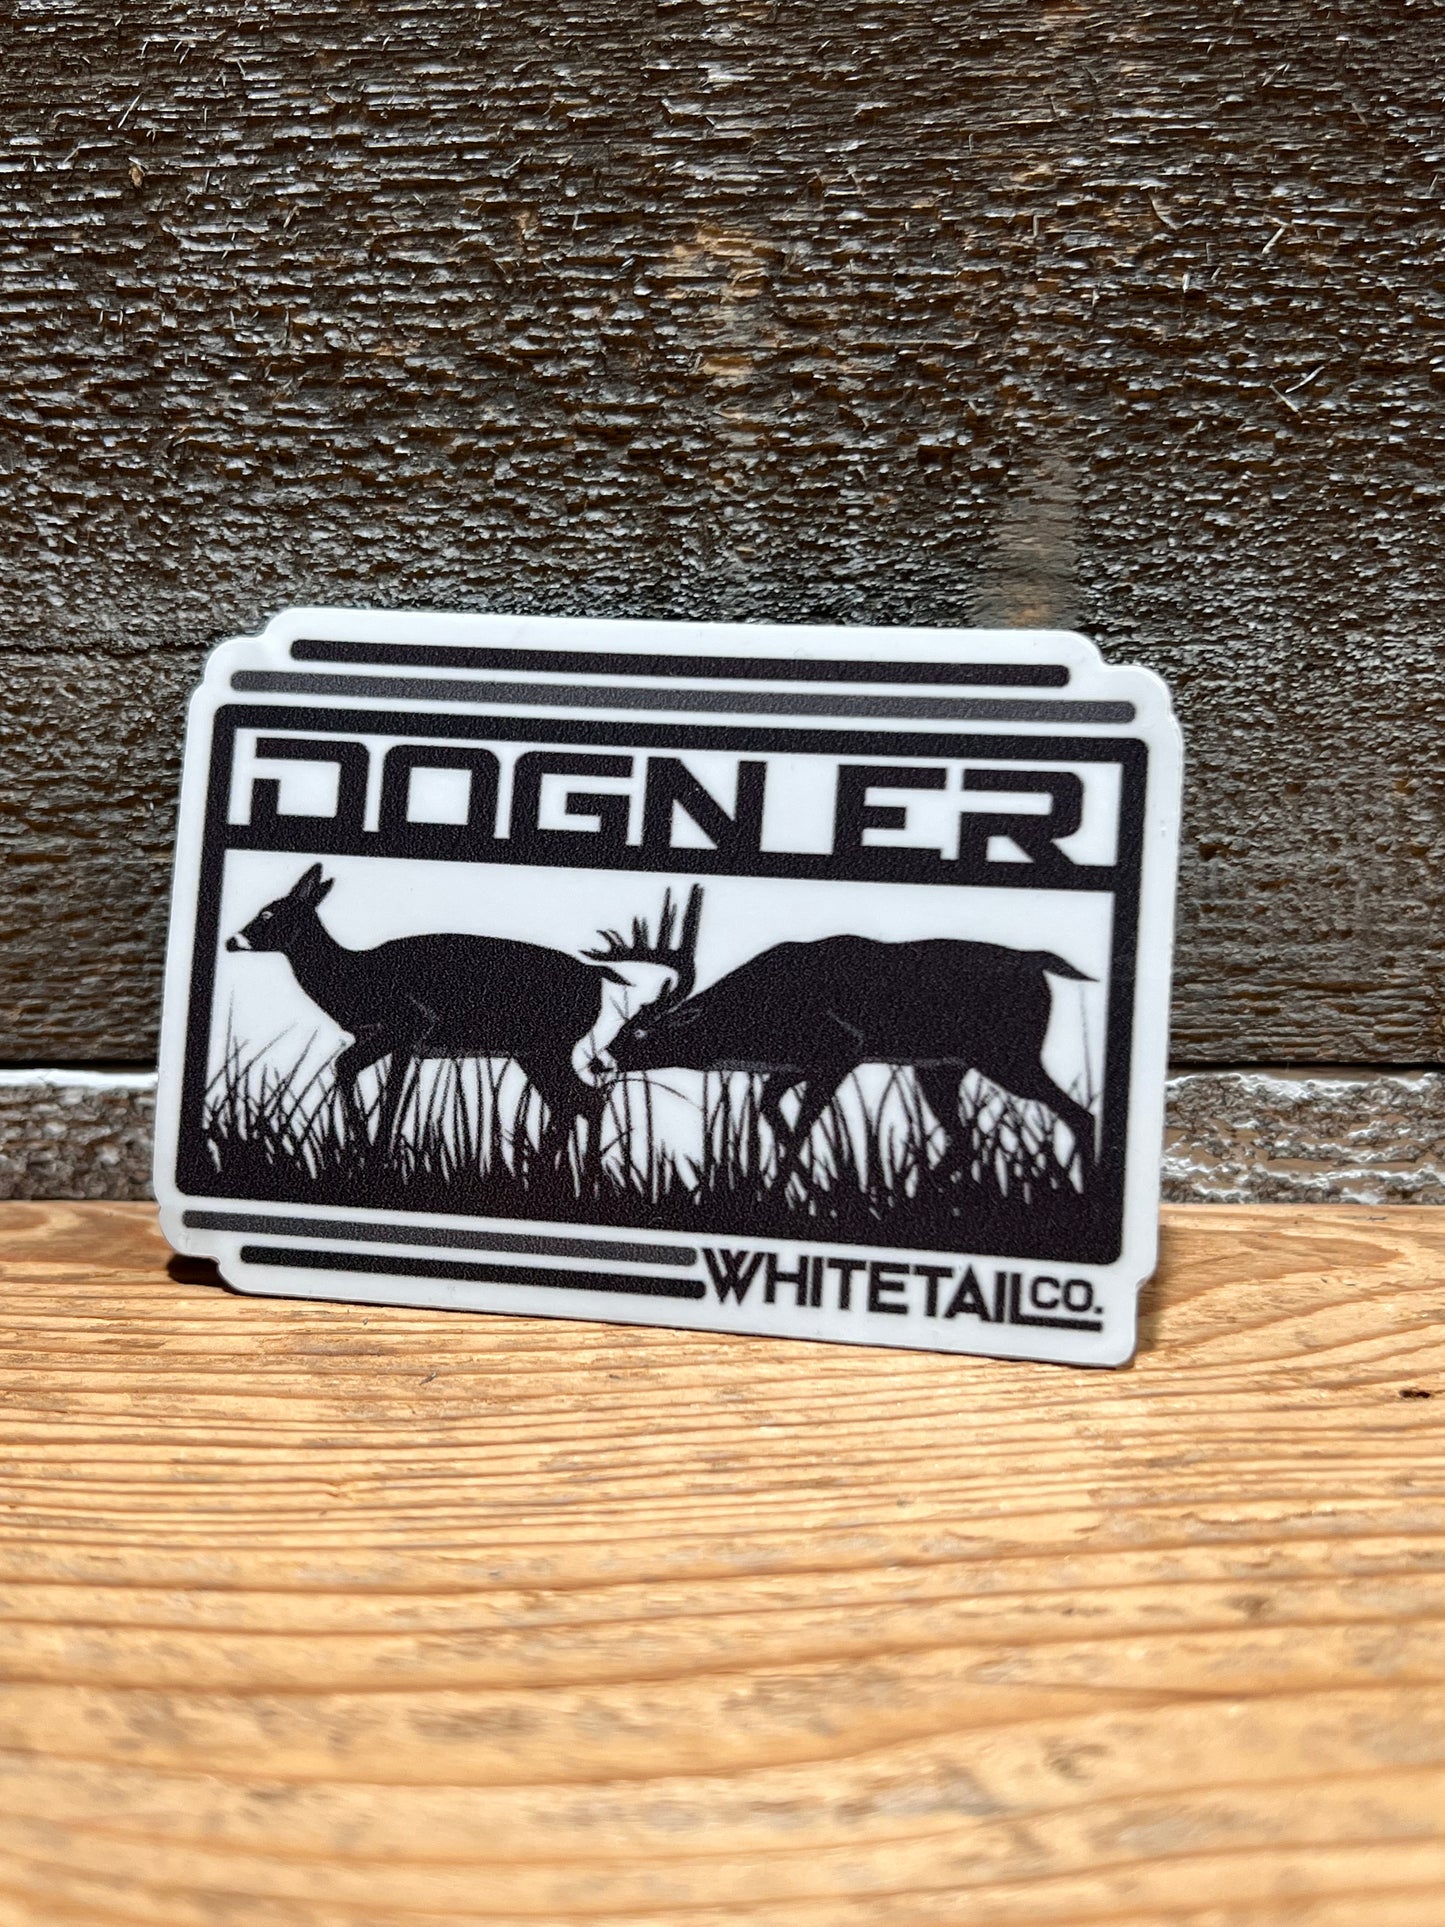 Whitetail Co. Dogn ER 3” Decal